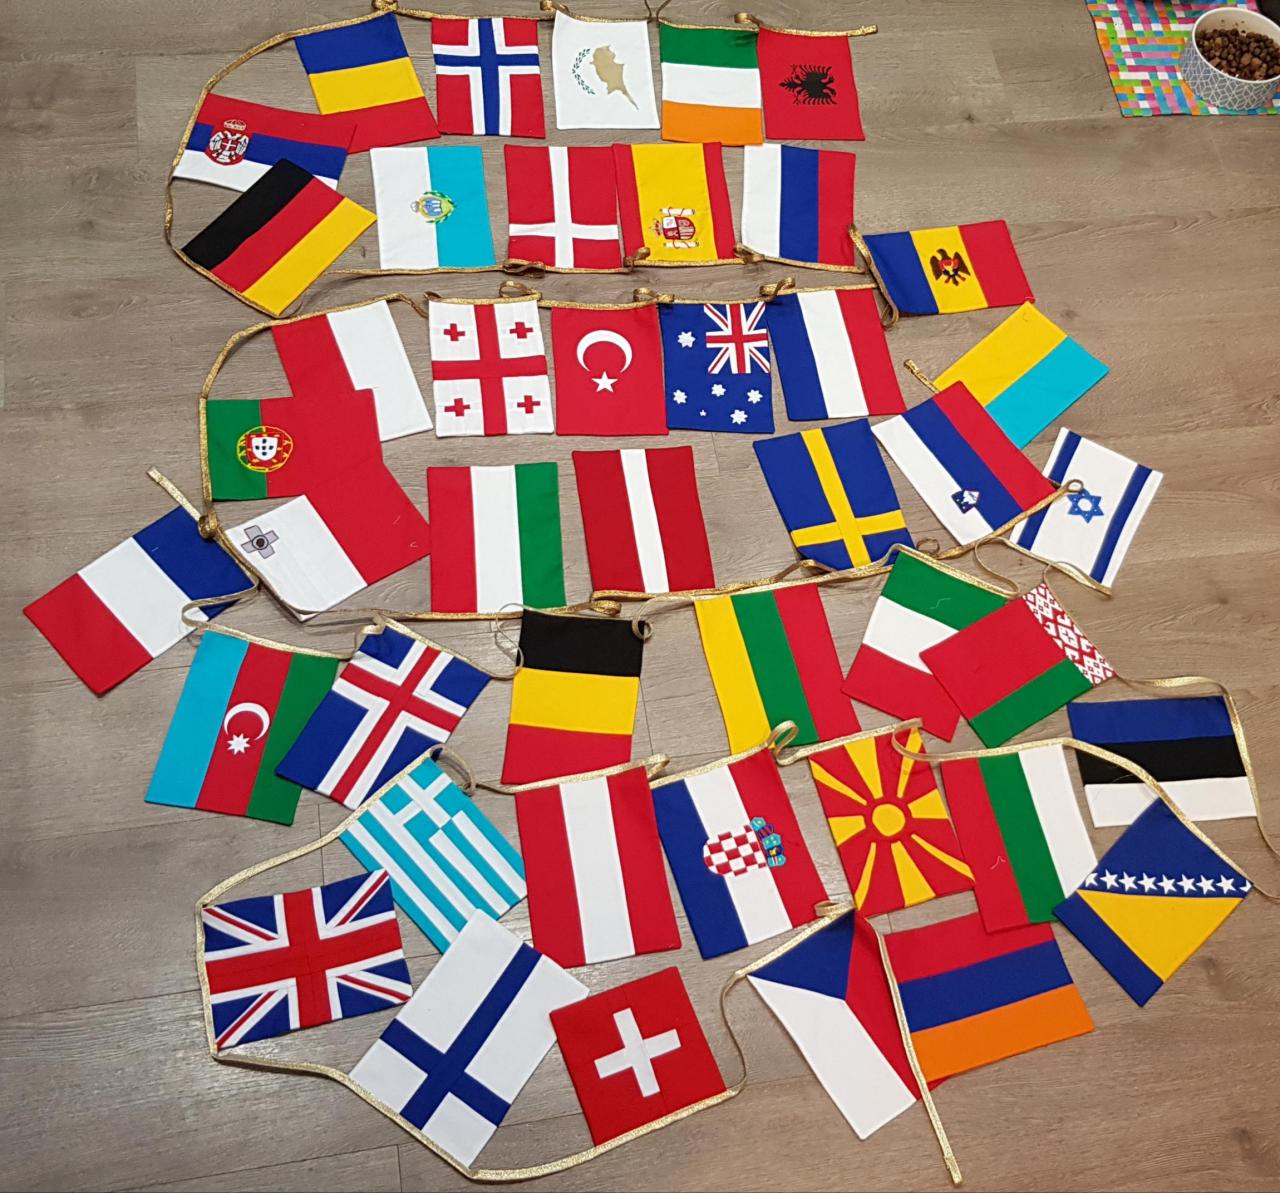 It was suggested I shared my Eurovision bunting here.from /r/vexillology 

Top comment: The southern Cross looks a little... Disfigured. Guess thats the Europeans revenge for a non European country almost winning. #It#suggested#I#shared#Eurovision#bunting #here. #flags#vexillology